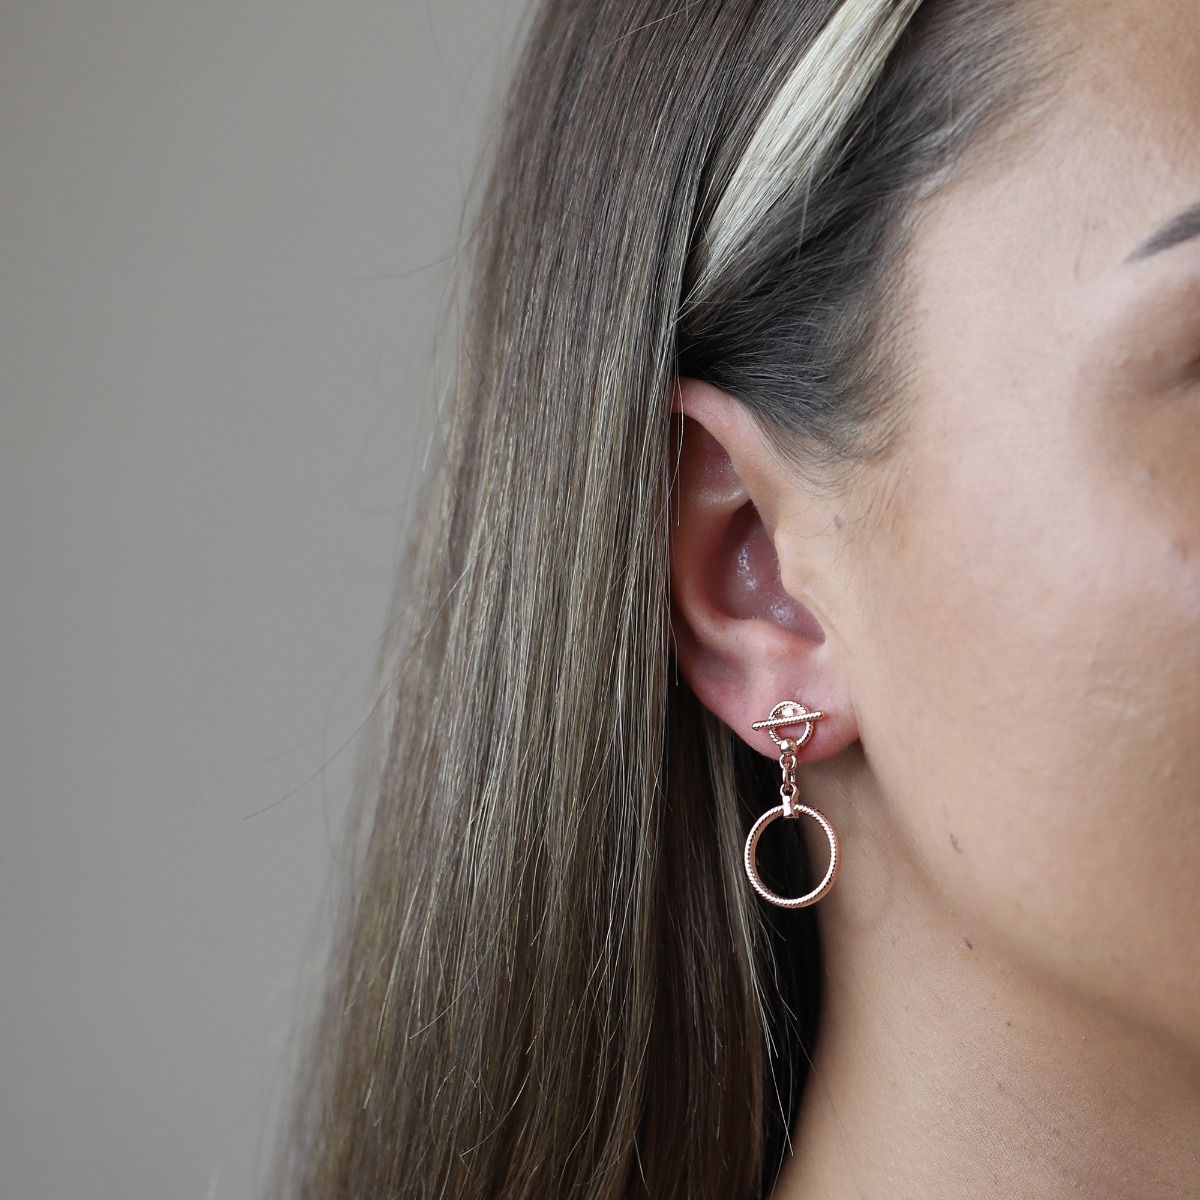 The Rose Gold Rope Style T-Bar Earrings are elegant and captivating. Crafted with meticulous attention to detail, these earrings feature a delicate rope-style design in a beautiful rose gold hue. The T-Bar pendant adds a touch of sophistication, making th